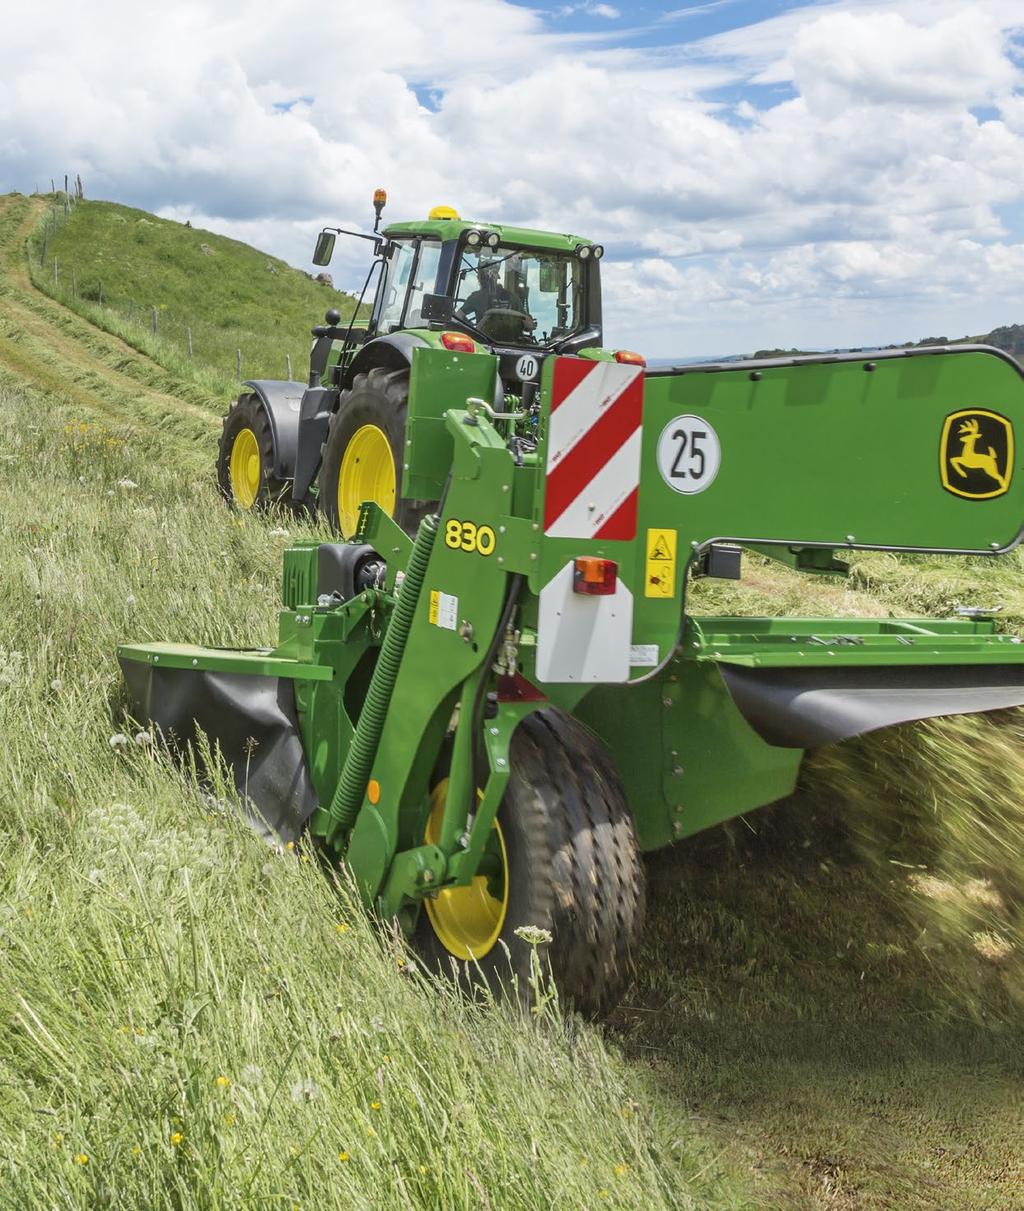 16 Tough enough to be a John Deere, but gentle on your soil.